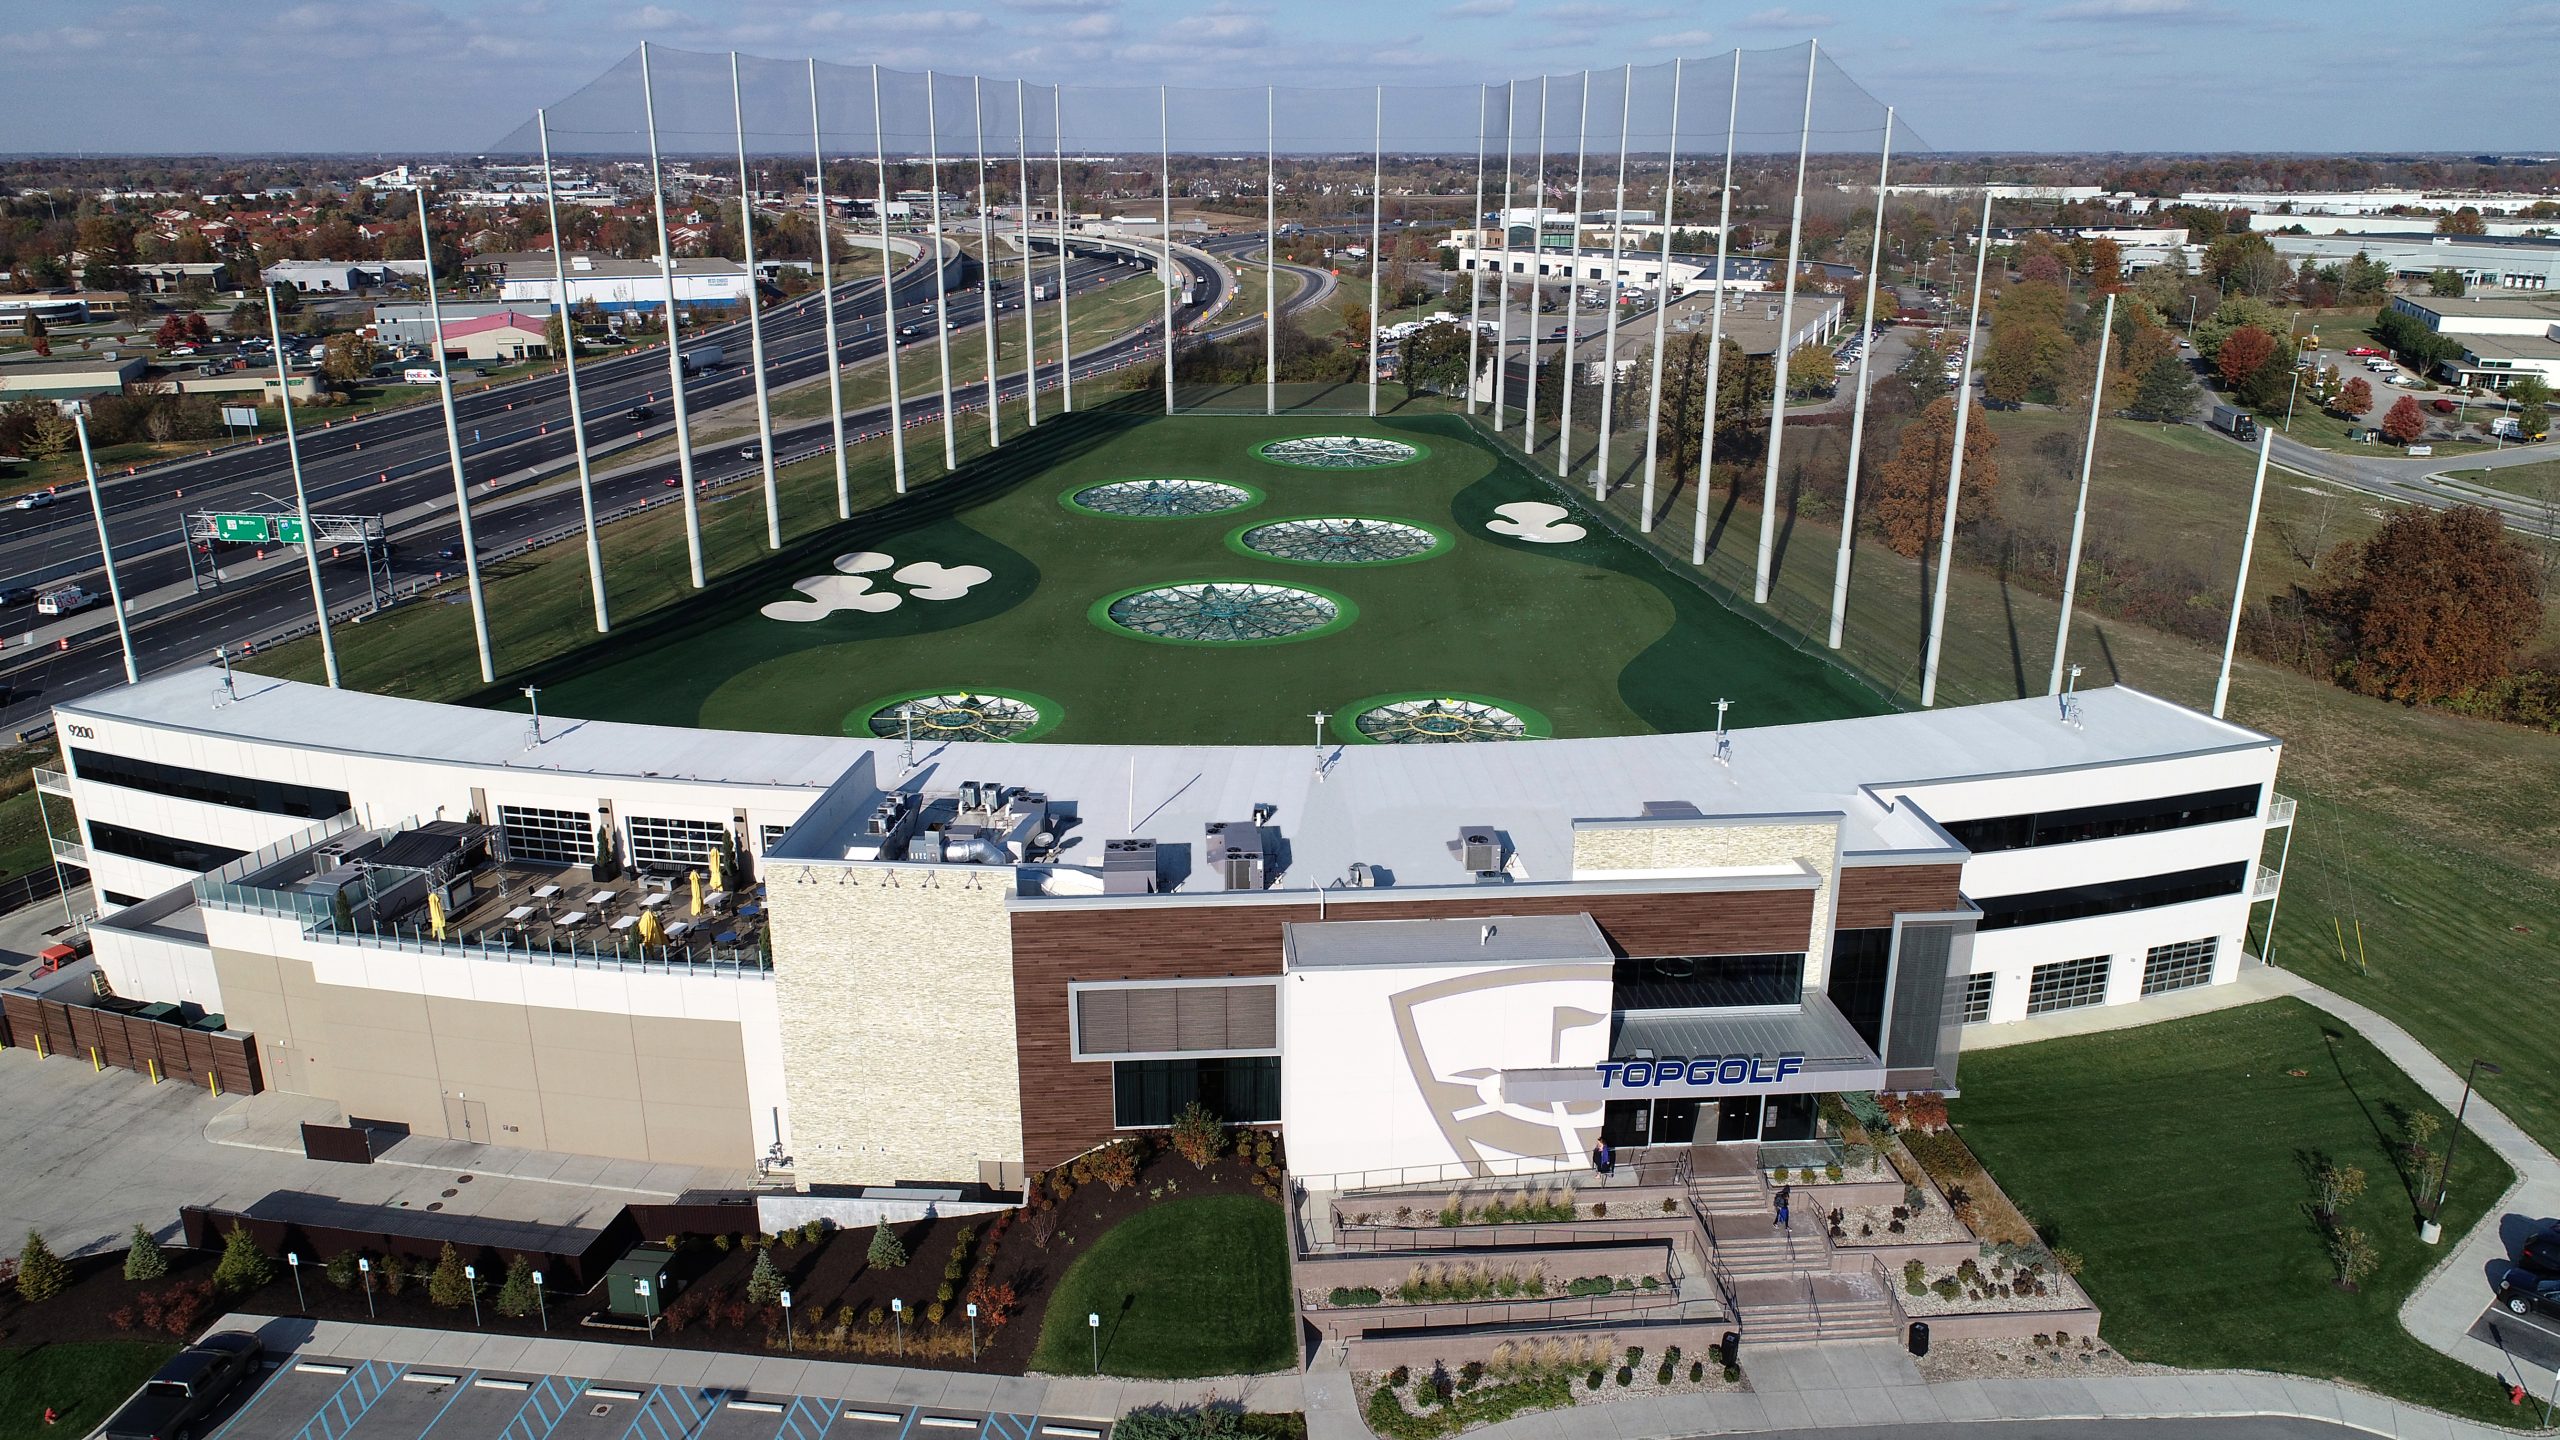 topgolf commercial roofing project by ce reeve roofing in indiana